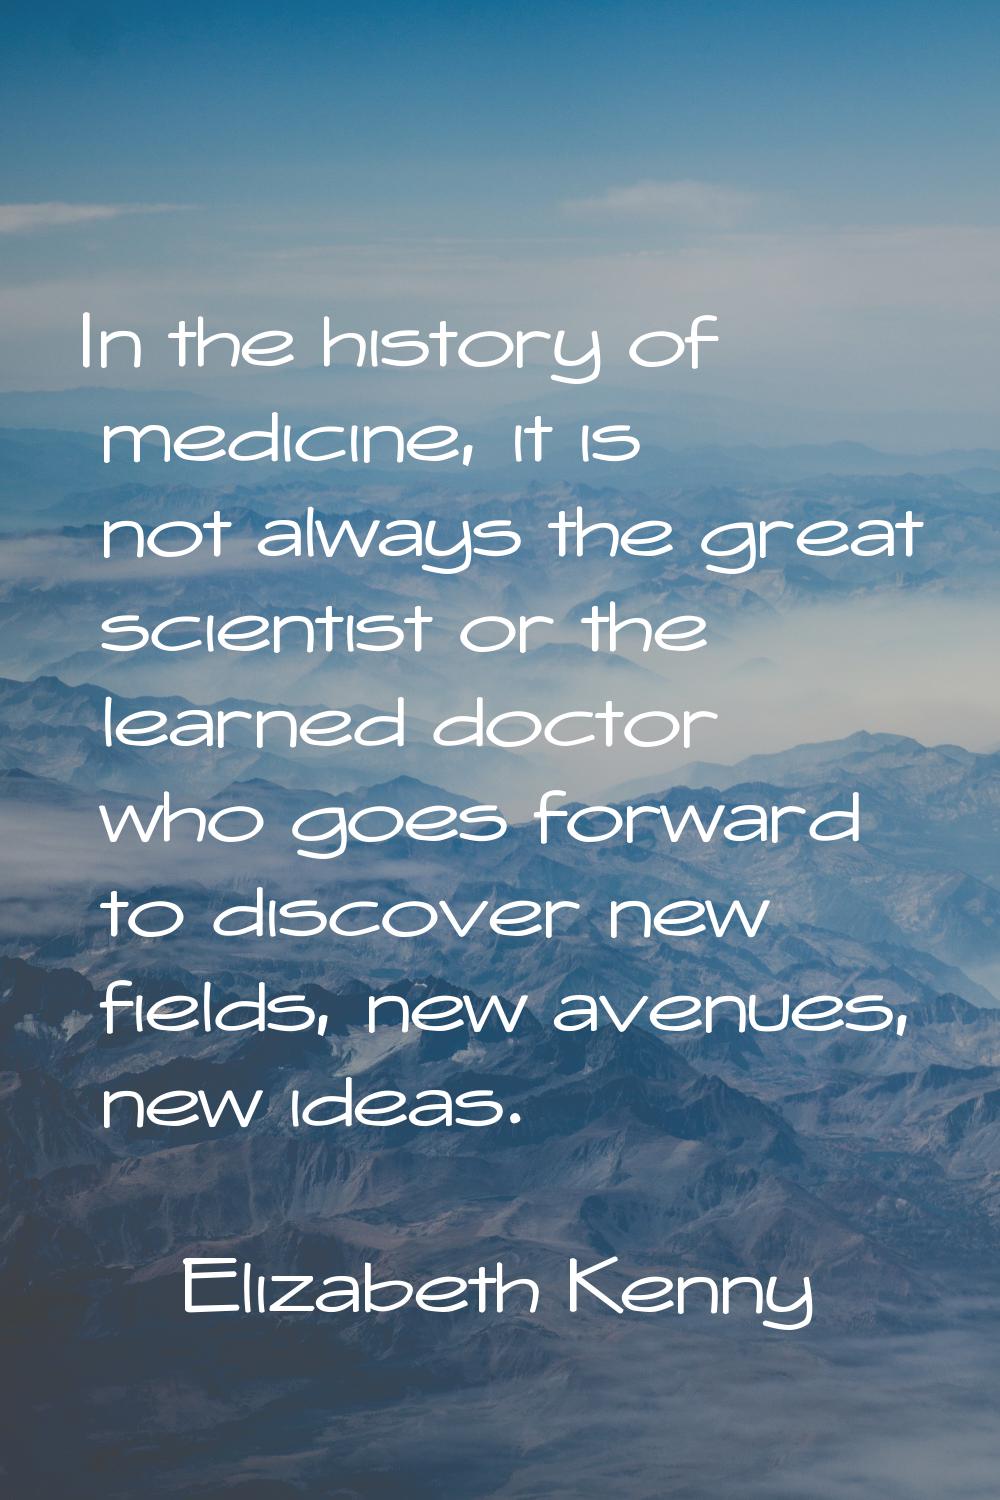 In the history of medicine, it is not always the great scientist or the learned doctor who goes for